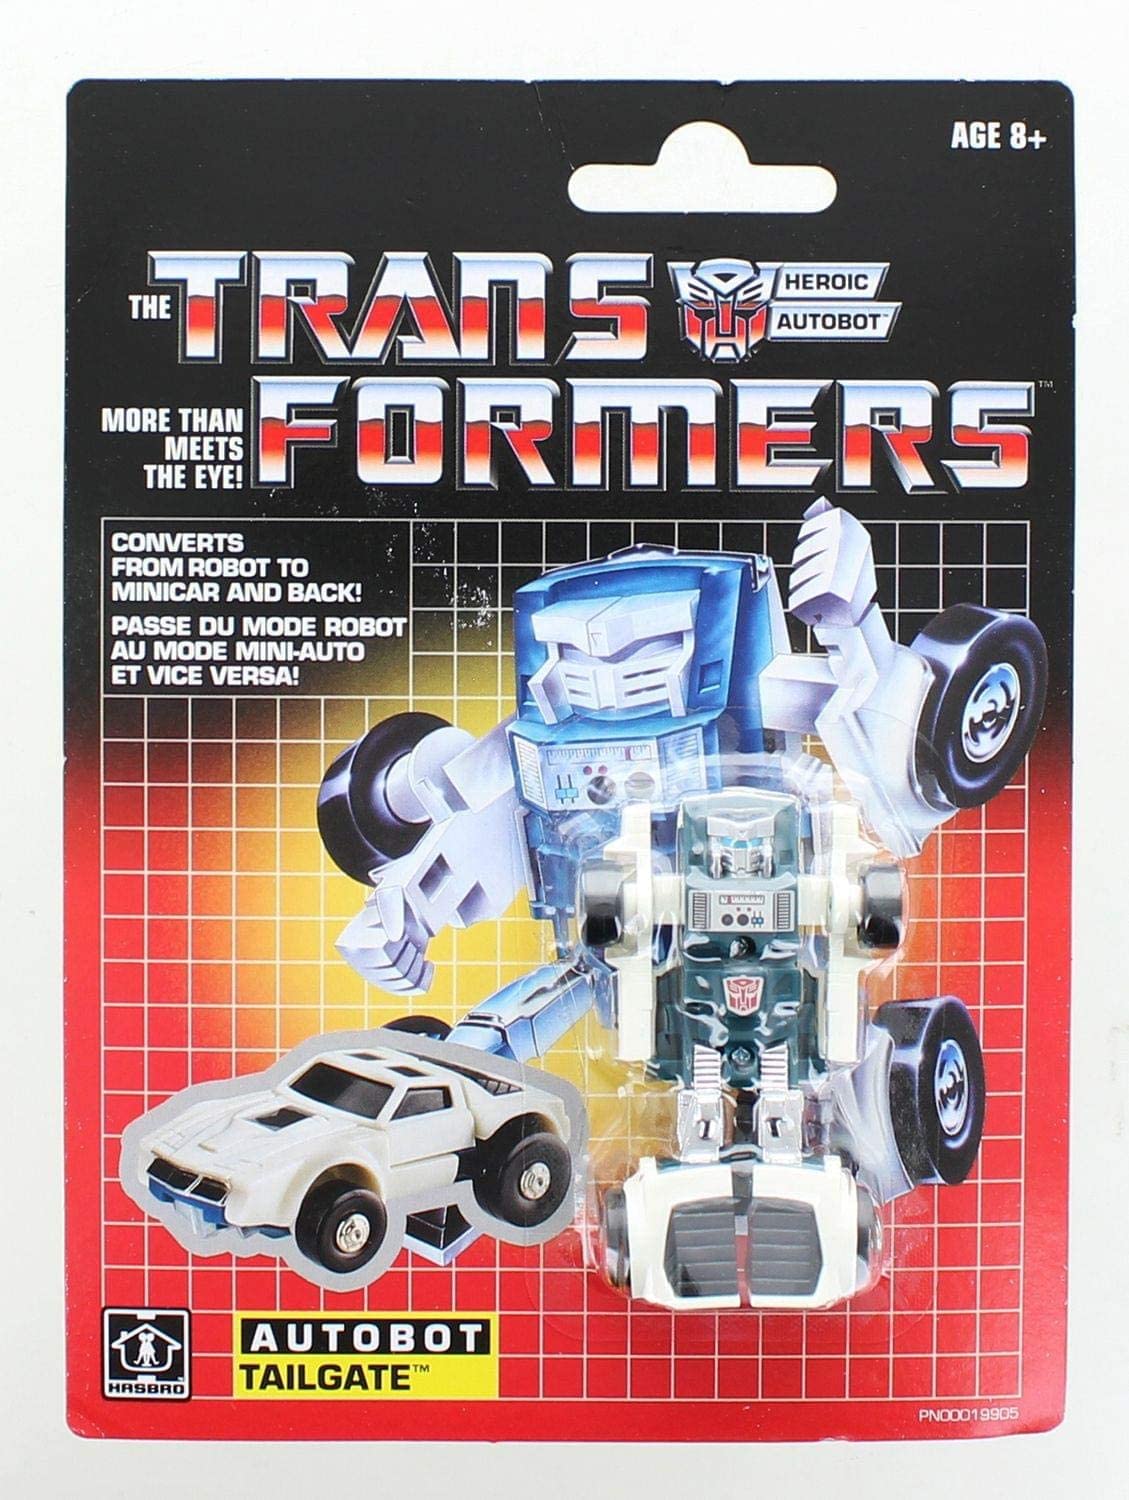 Transformers G1 Reissue Exclusive Heroic Autobot Tailgate 3" Action Figure